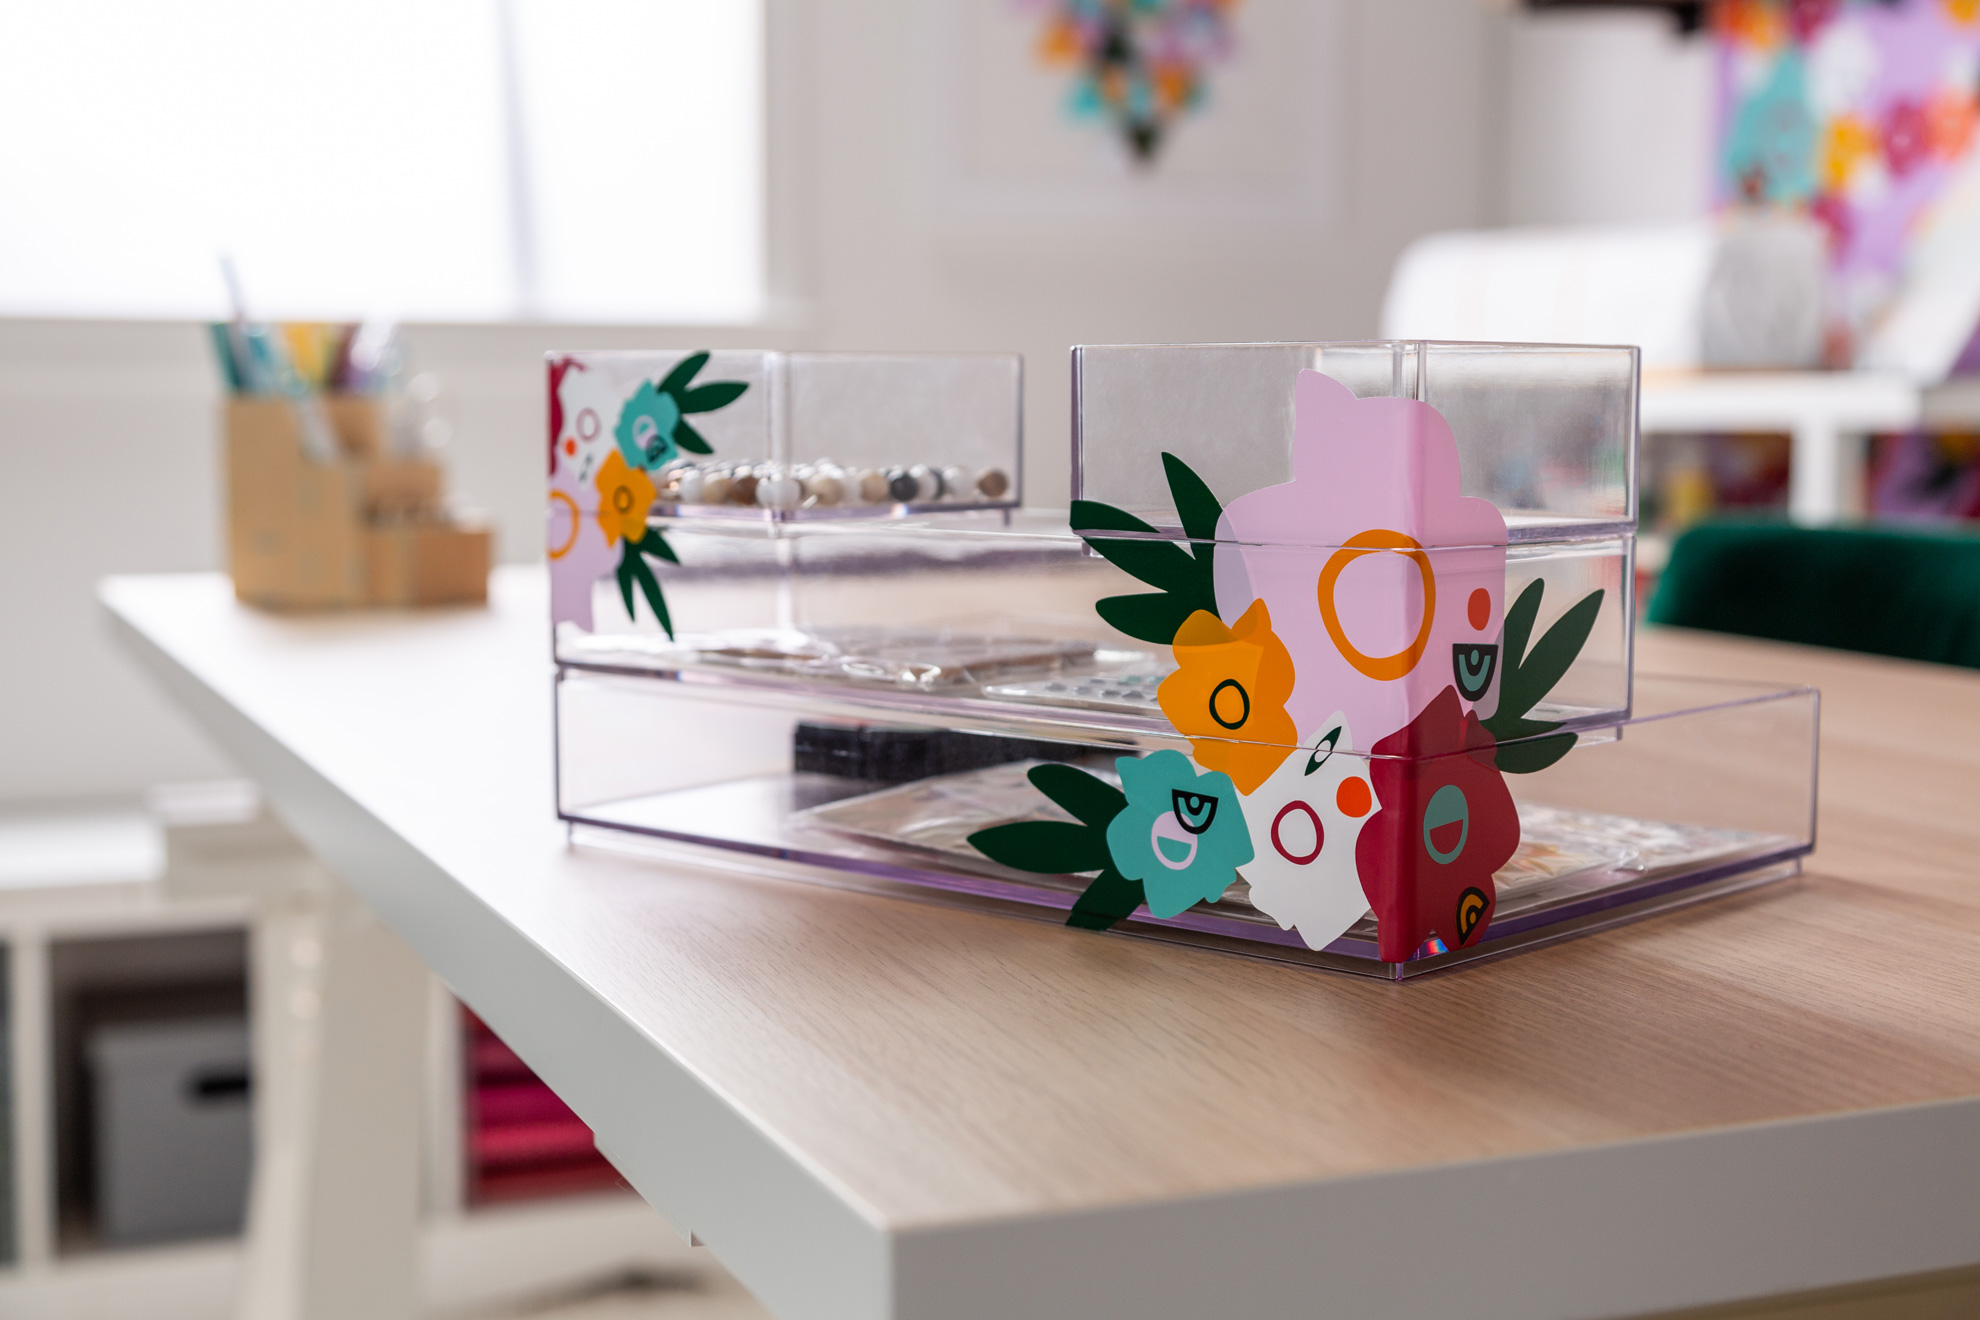 Desk organization projects for your home workspace – Cricut